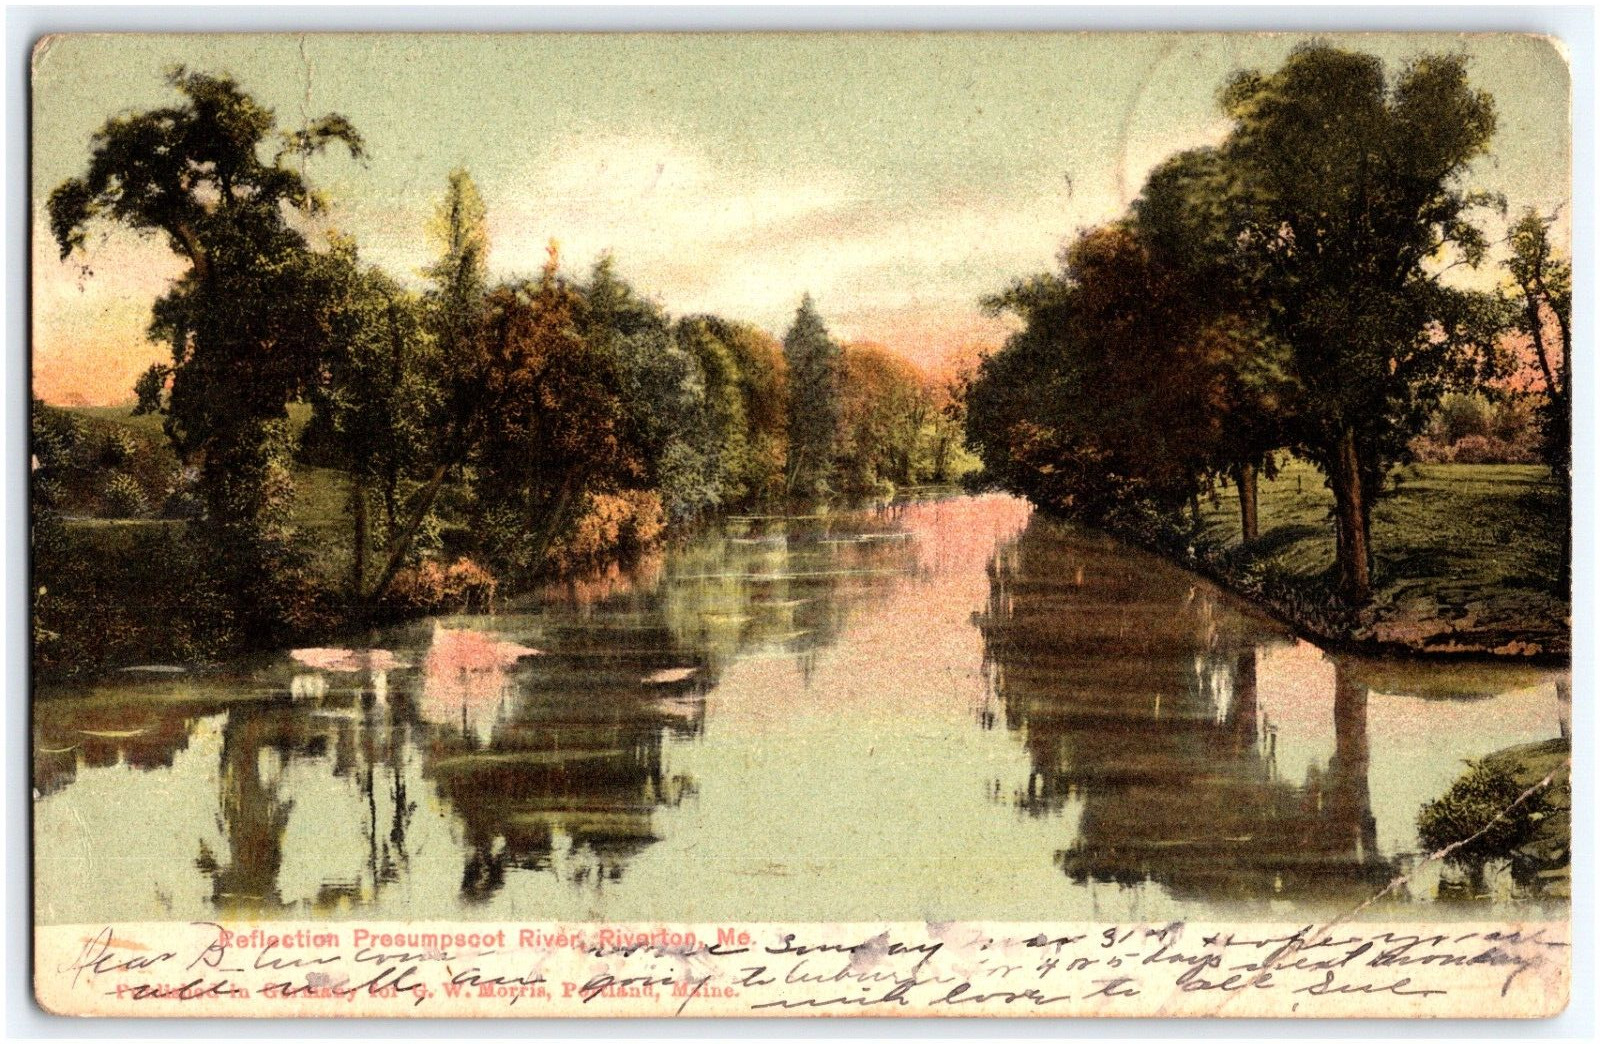 REFLECTION PRESUMPSCOT RIVER IN RIVERTON MAINE POSTED 1906 UB POSTCARD